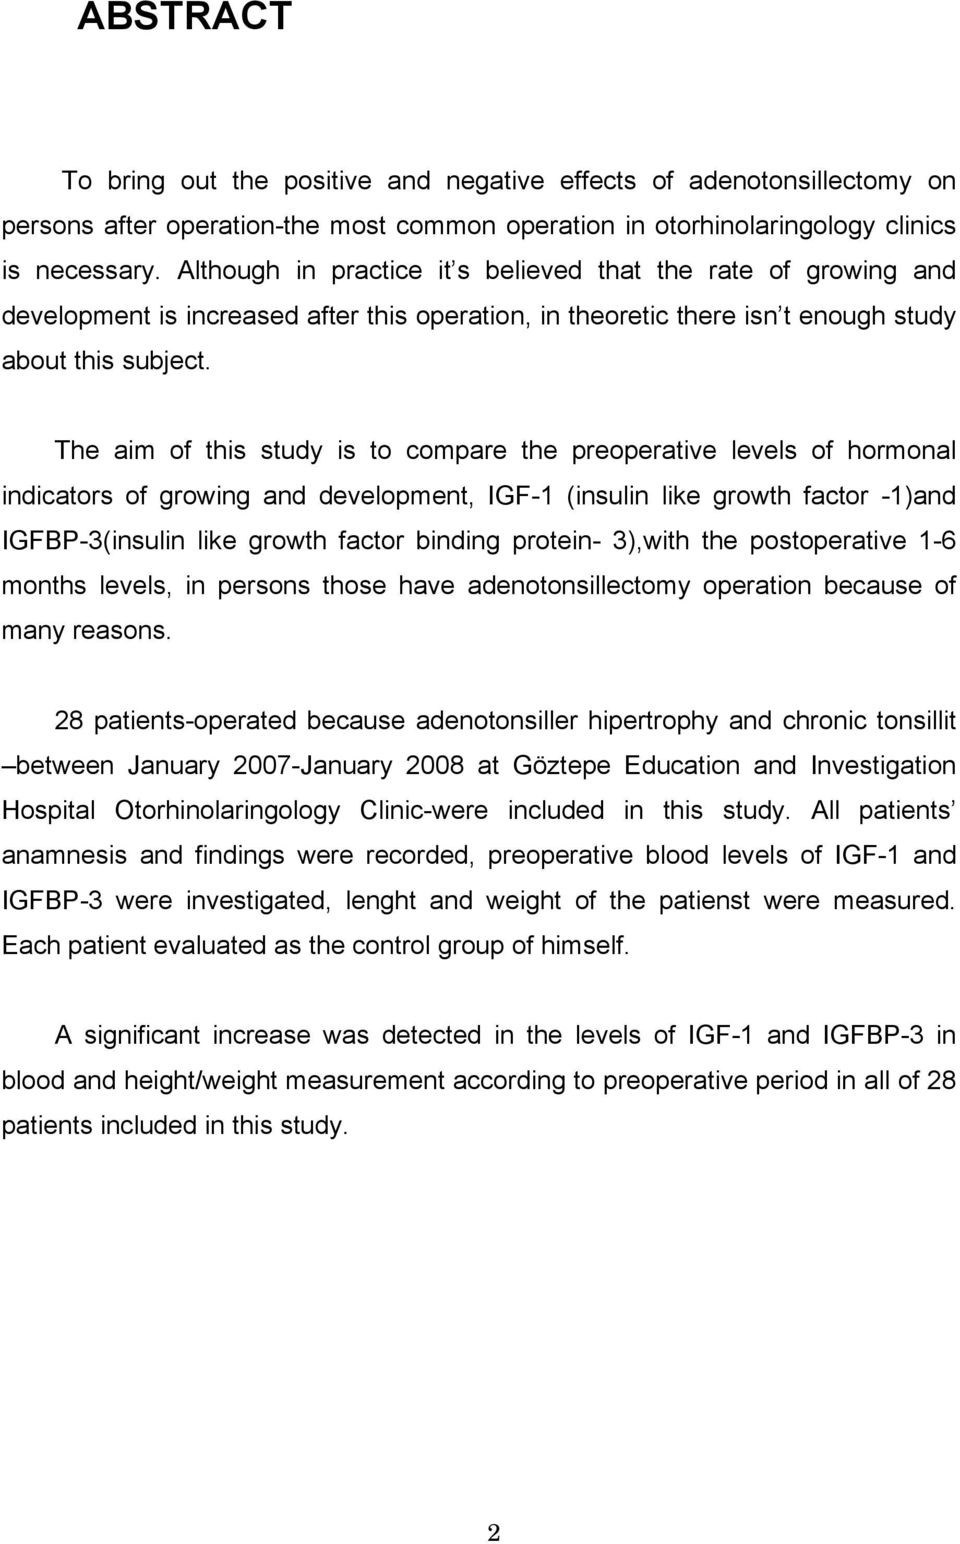 The aim of this study is to compare the preoperative levels of hormonal indicators of growing and development, IGF-1 (insulin like growth factor -1)and IGFBP-3(insulin like growth factor binding